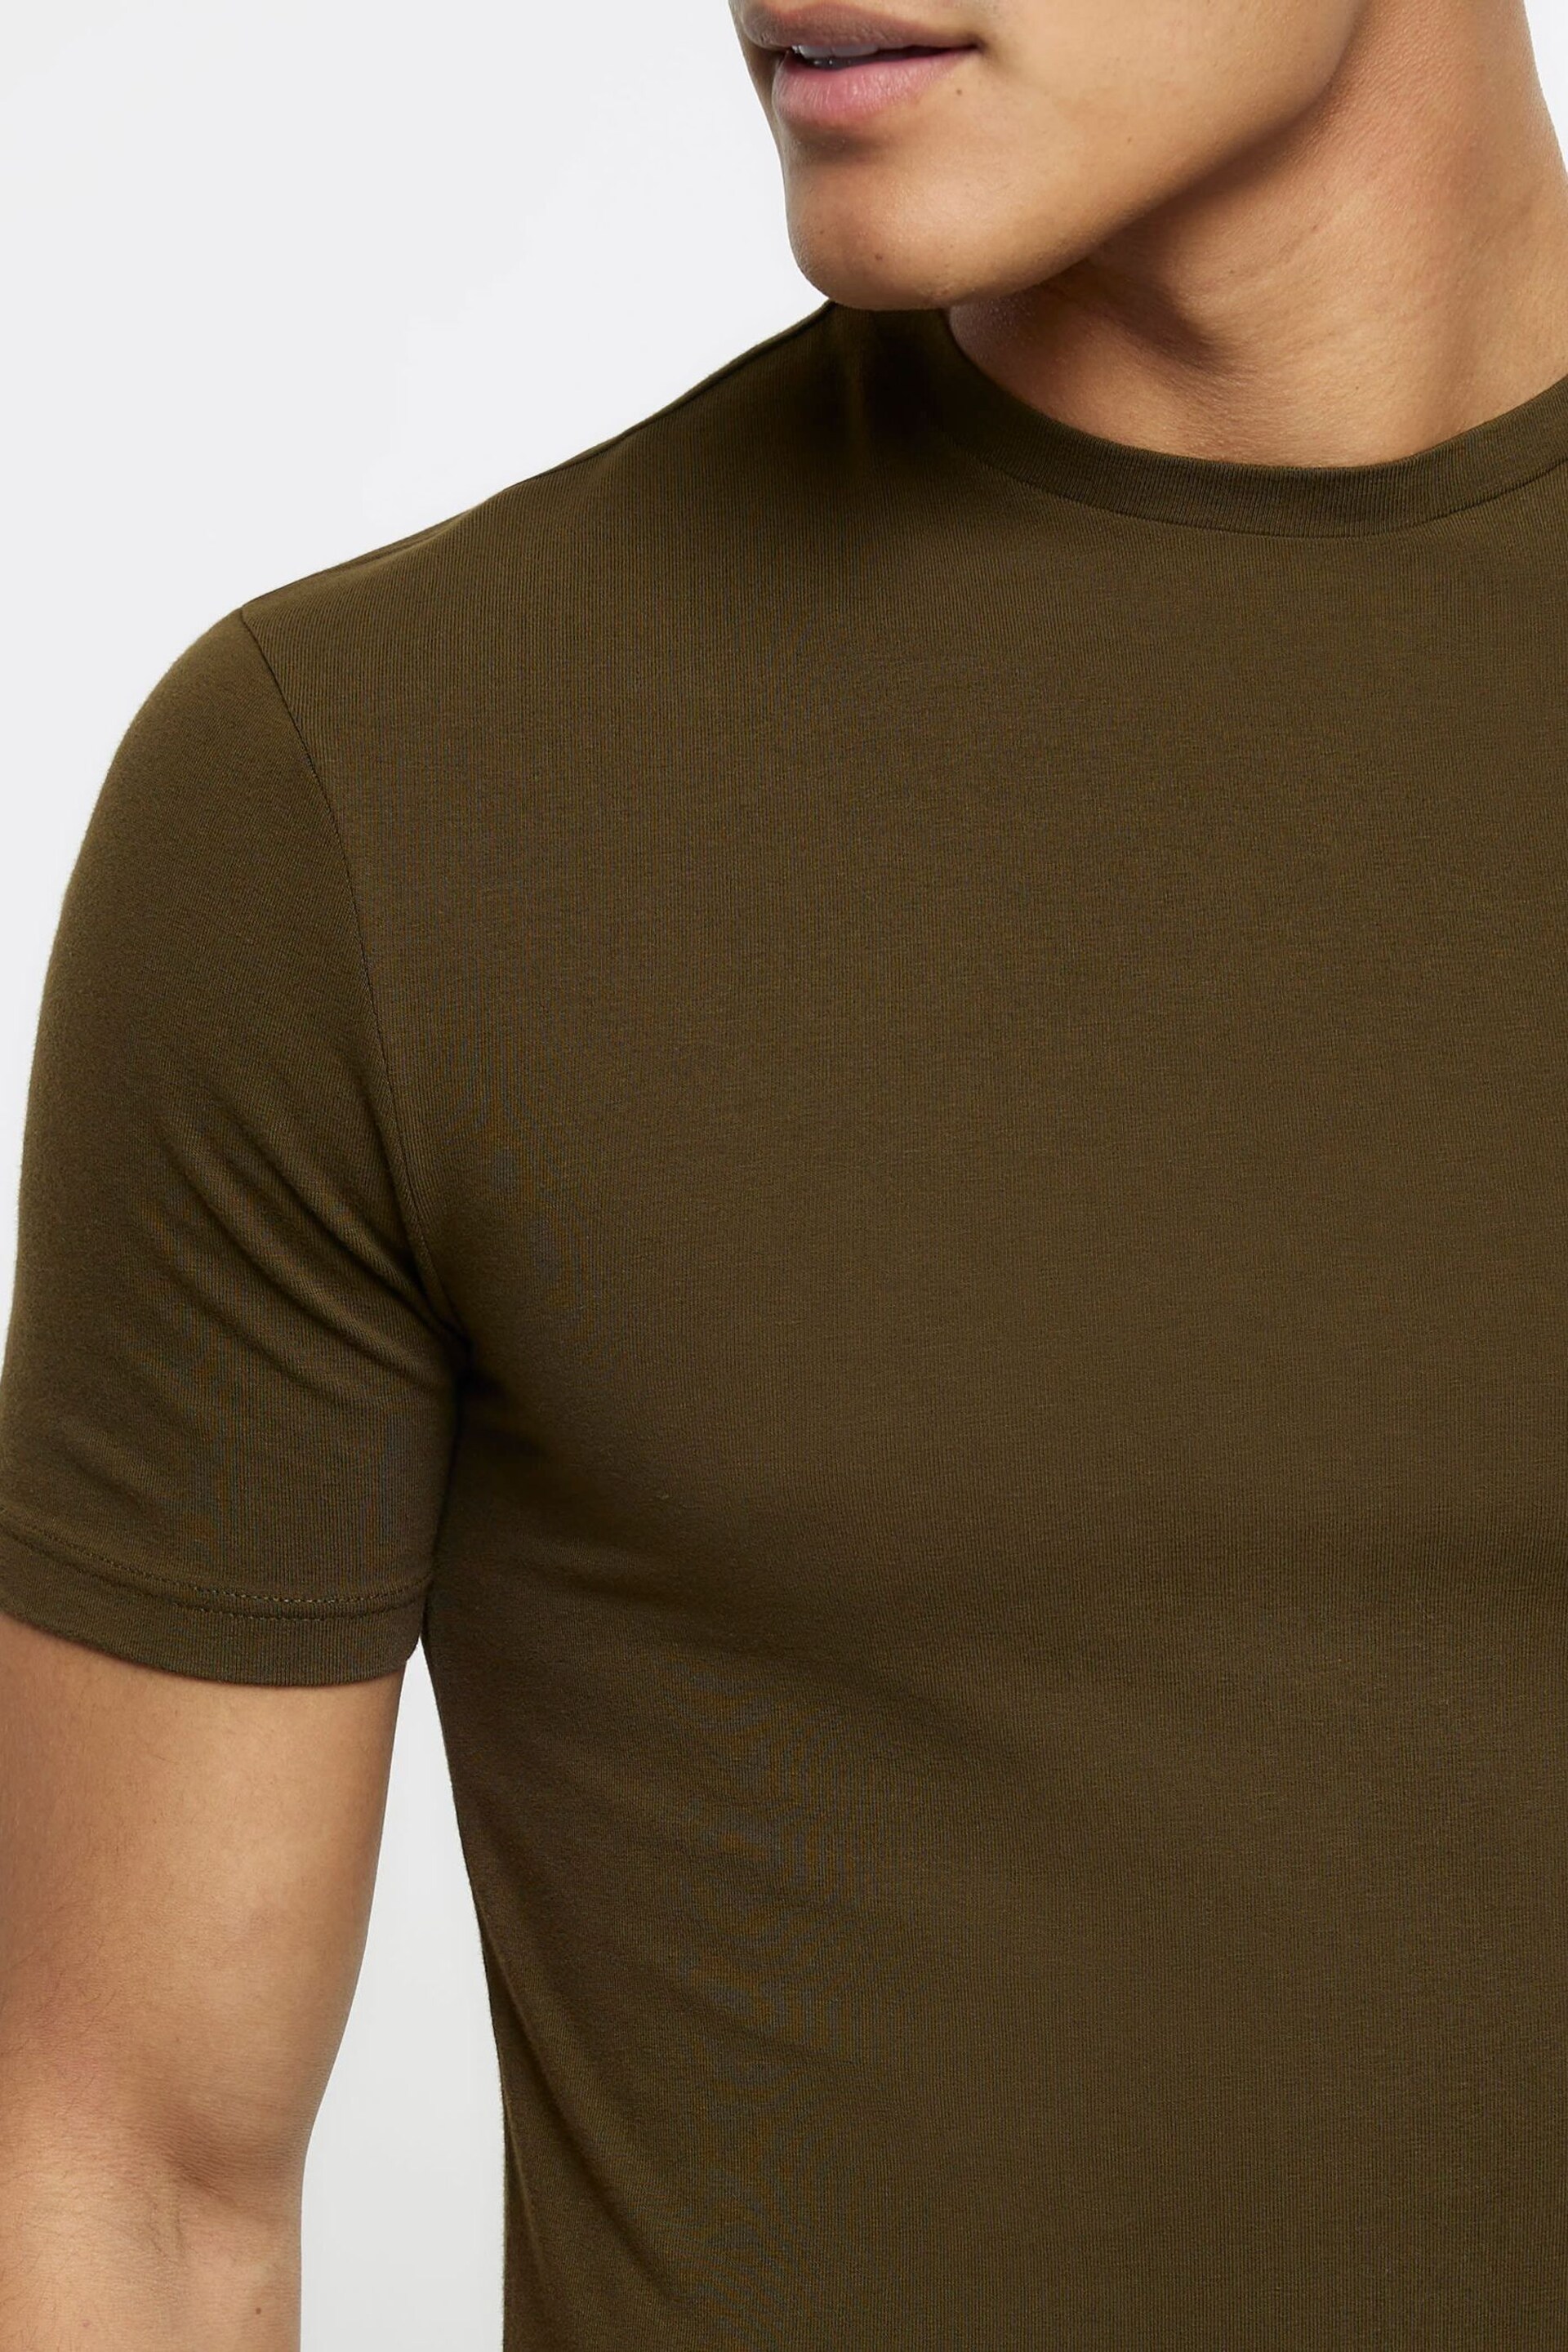 River Island Khaki Green Muscle Fit T-Shirt - Image 4 of 5